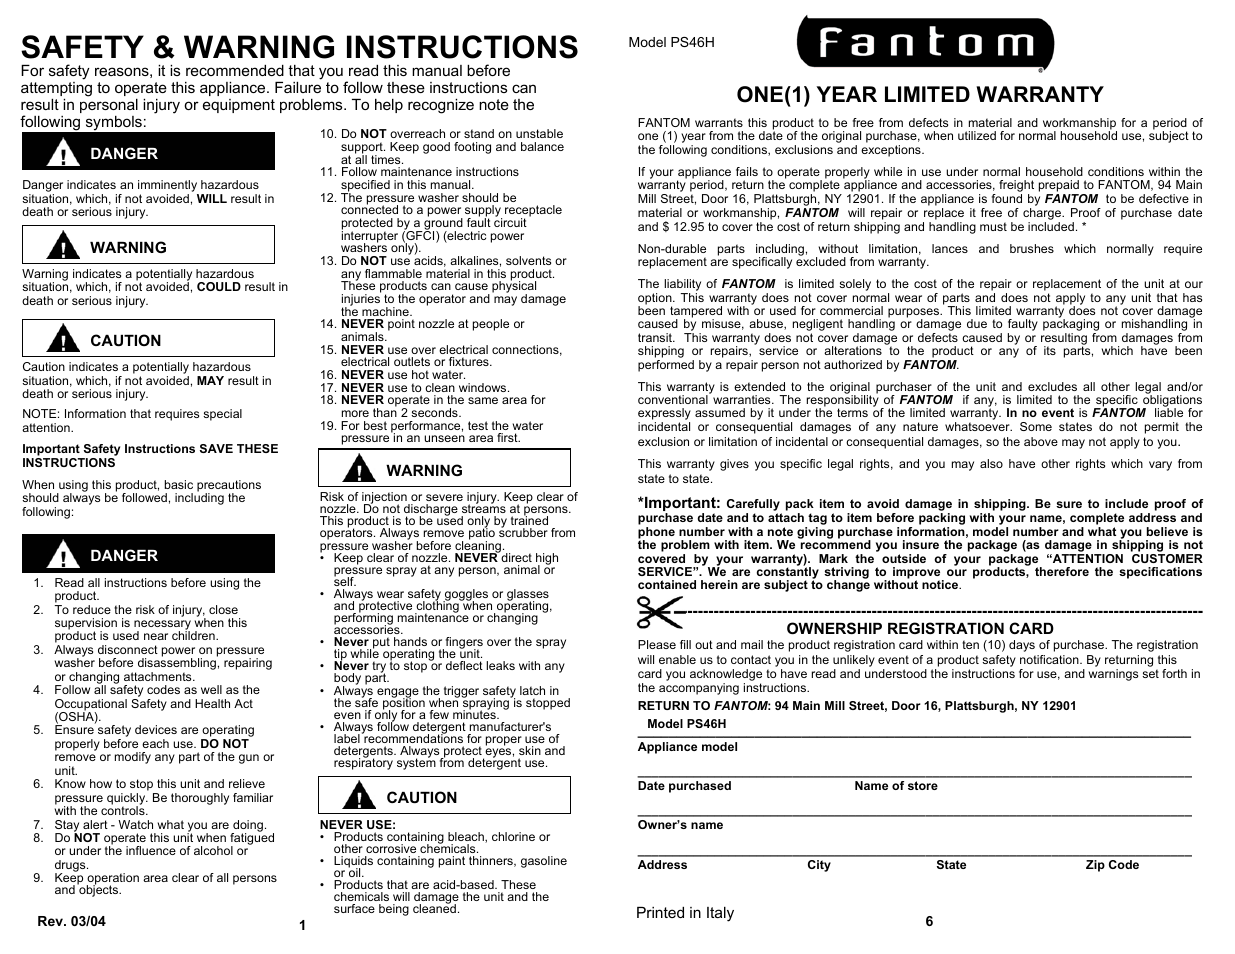 Safety & warning instructions, One(1) year limited warranty | Fantom Vacuum PATIO SCRUBBER PS46H User Manual | Page 2 / 4